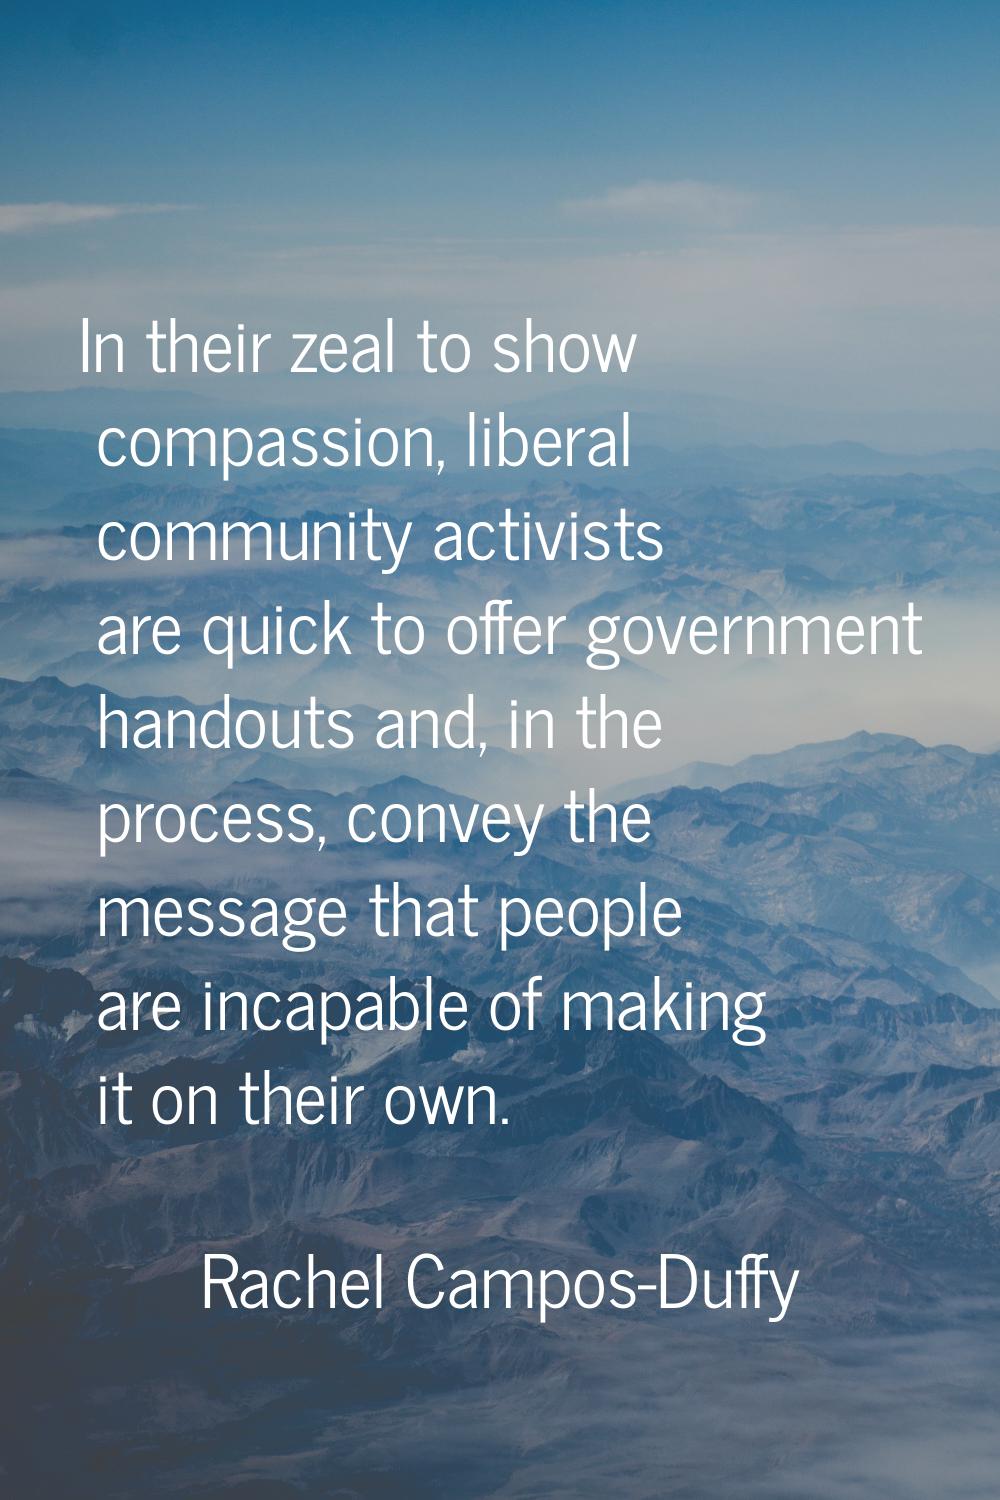 In their zeal to show compassion, liberal community activists are quick to offer government handout